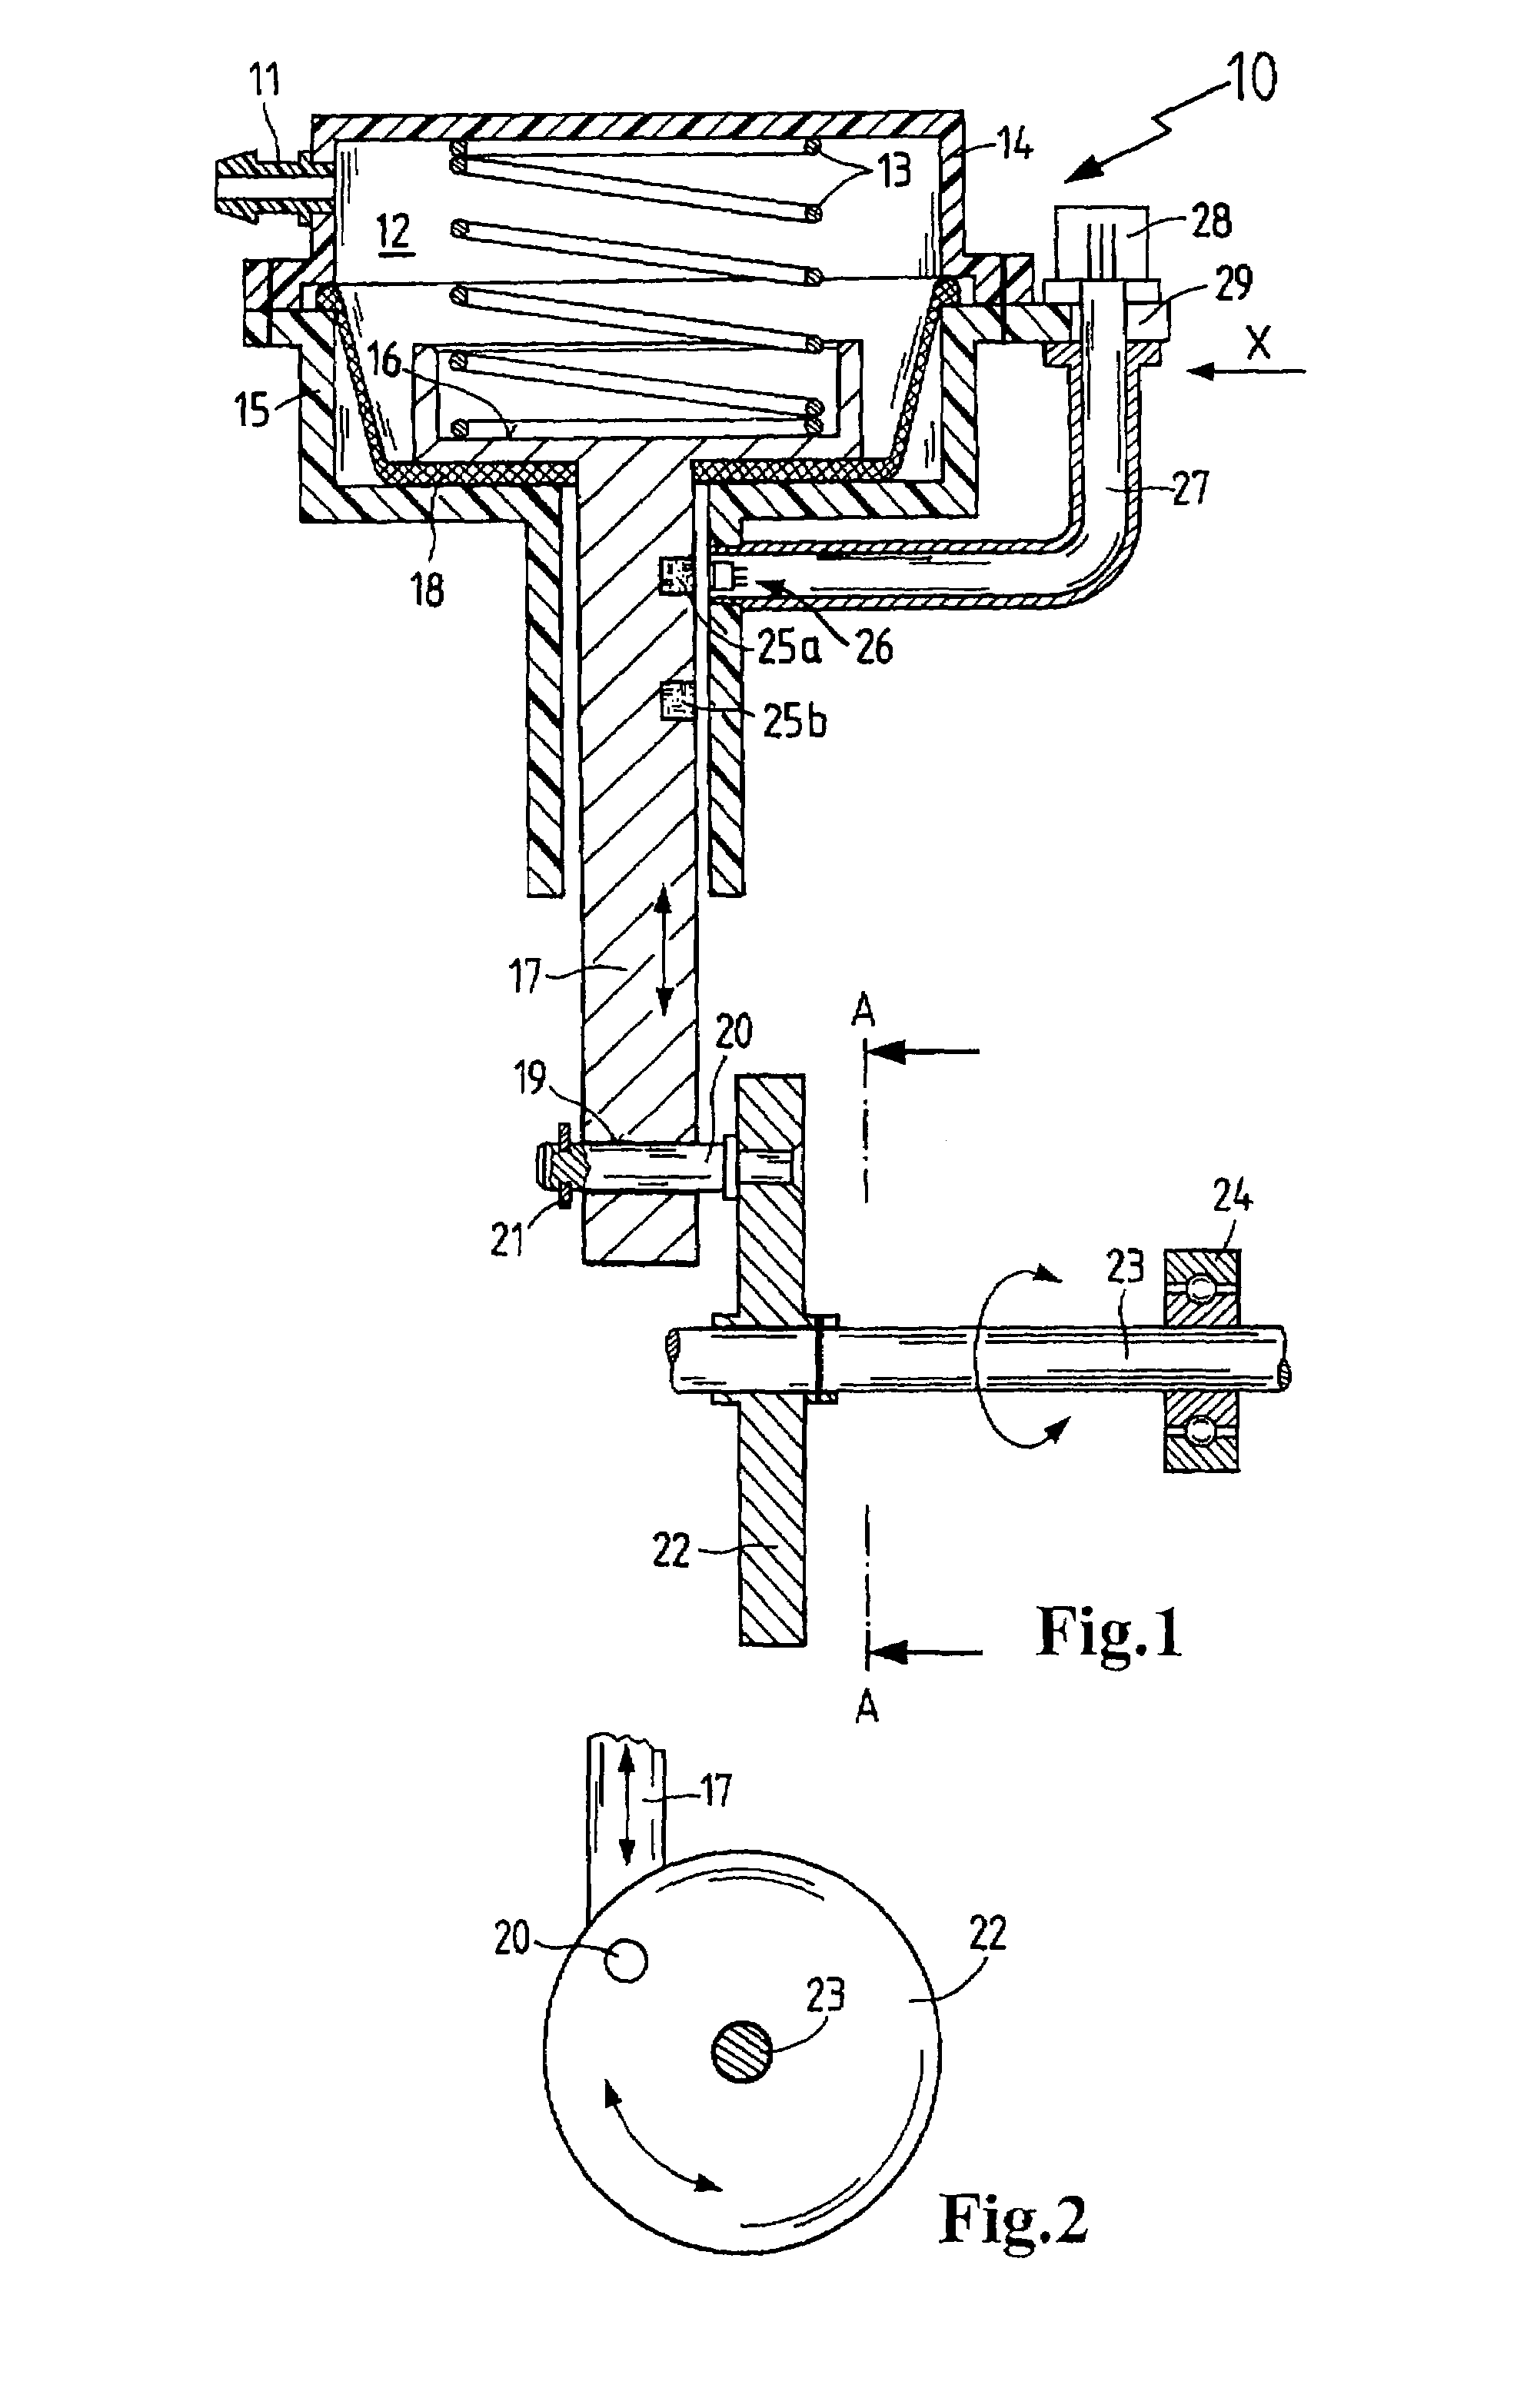 Actuator element with position detection